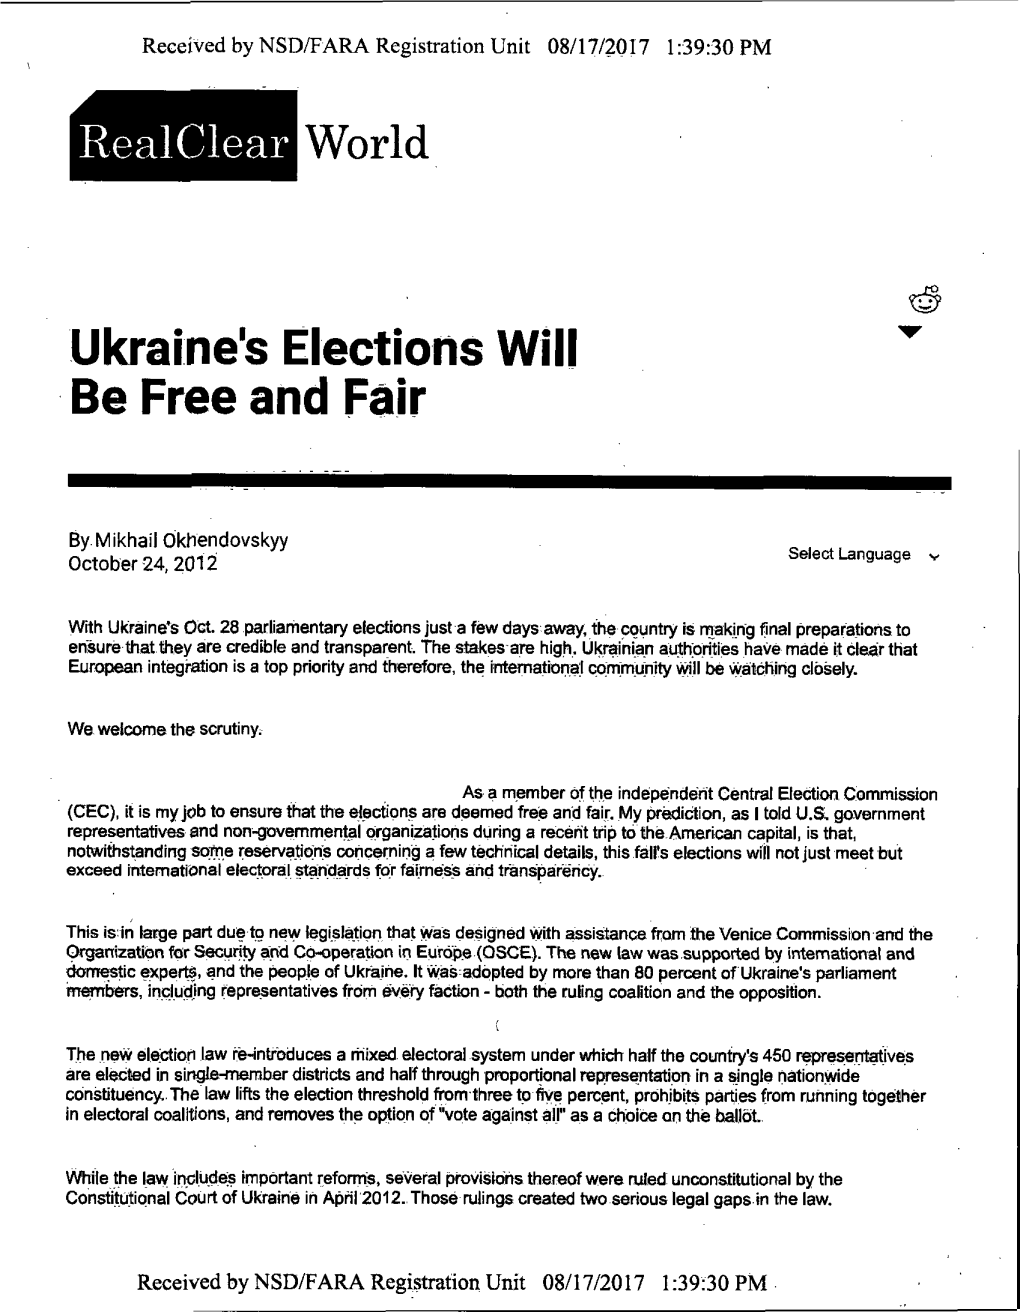 Ukraine's Elections Will Be Free and Fair